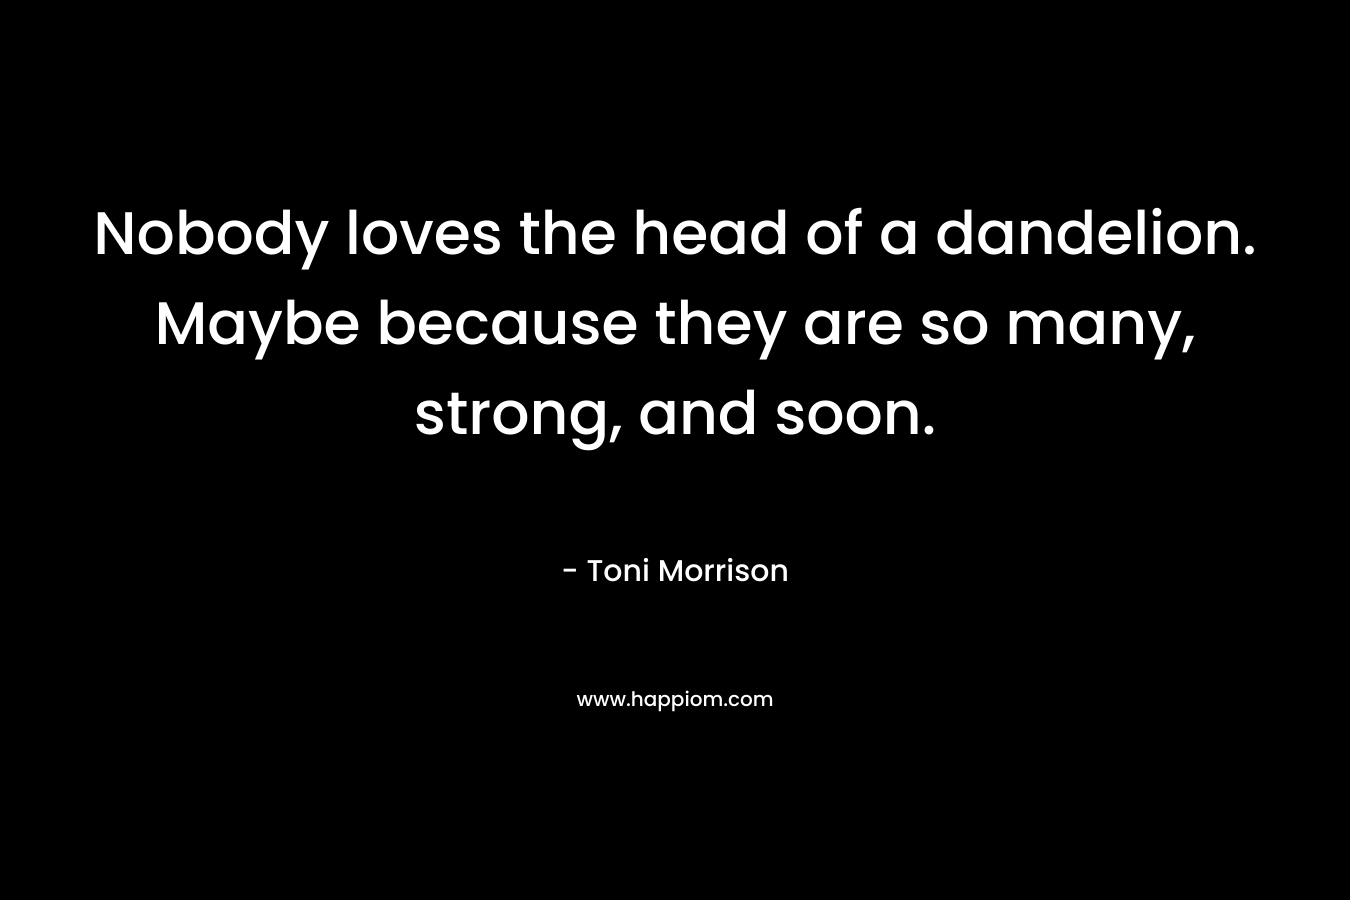 Nobody loves the head of a dandelion. Maybe because they are so many, strong, and soon. – Toni Morrison